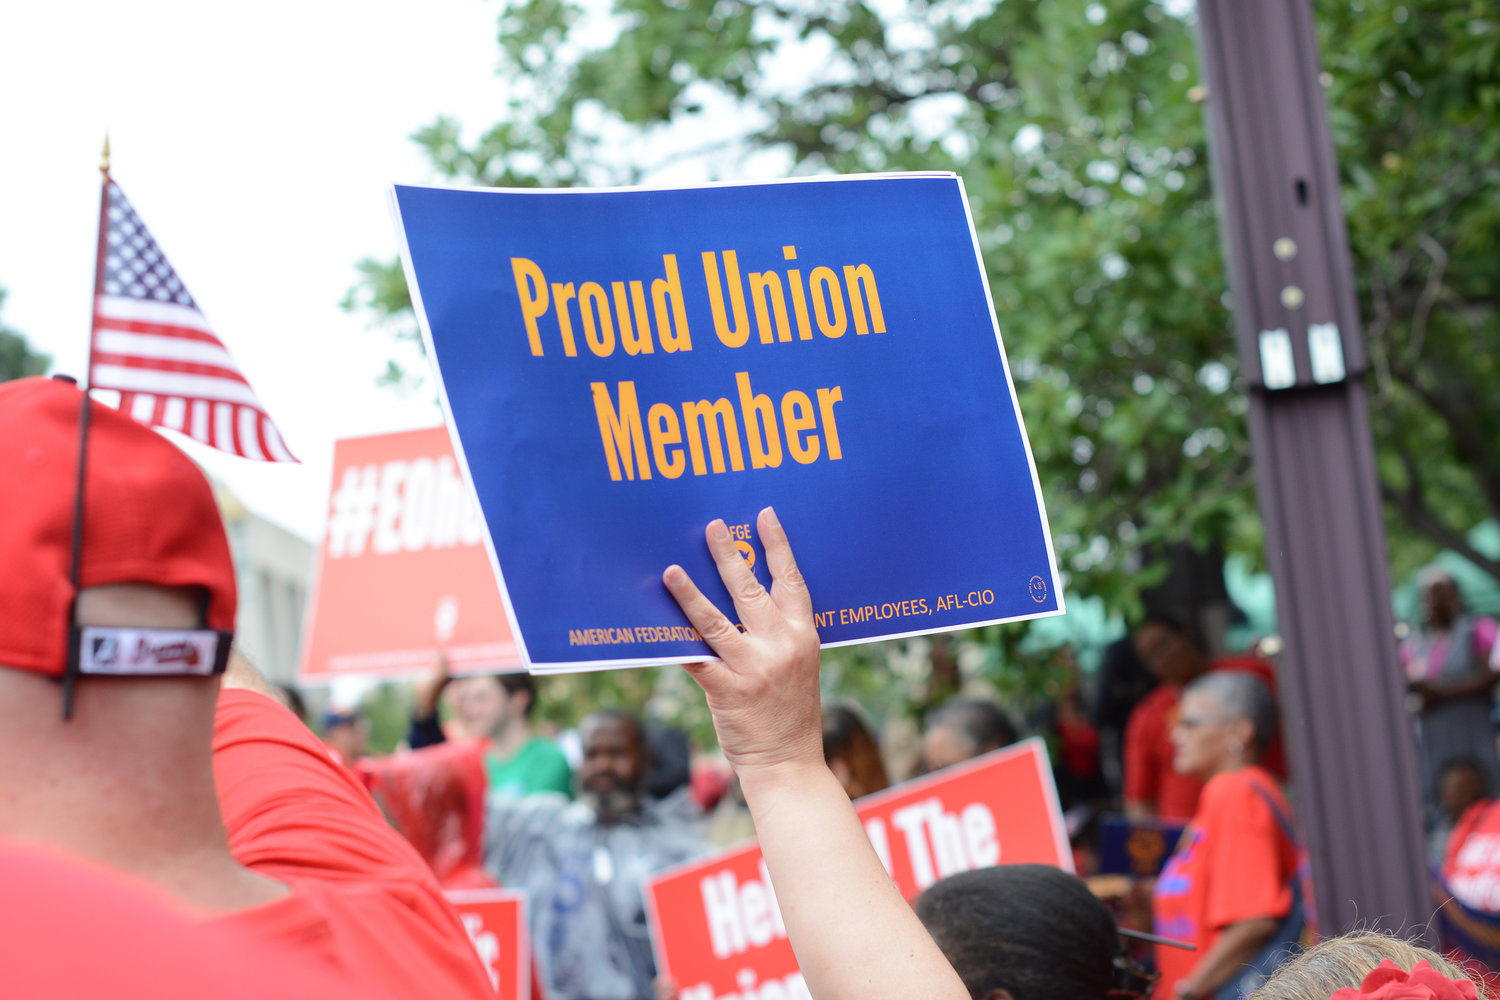 Michigan’s union membership rate went up in the last year while the national rate slid, according to the U.S. Bureau of Labor Statistics. 